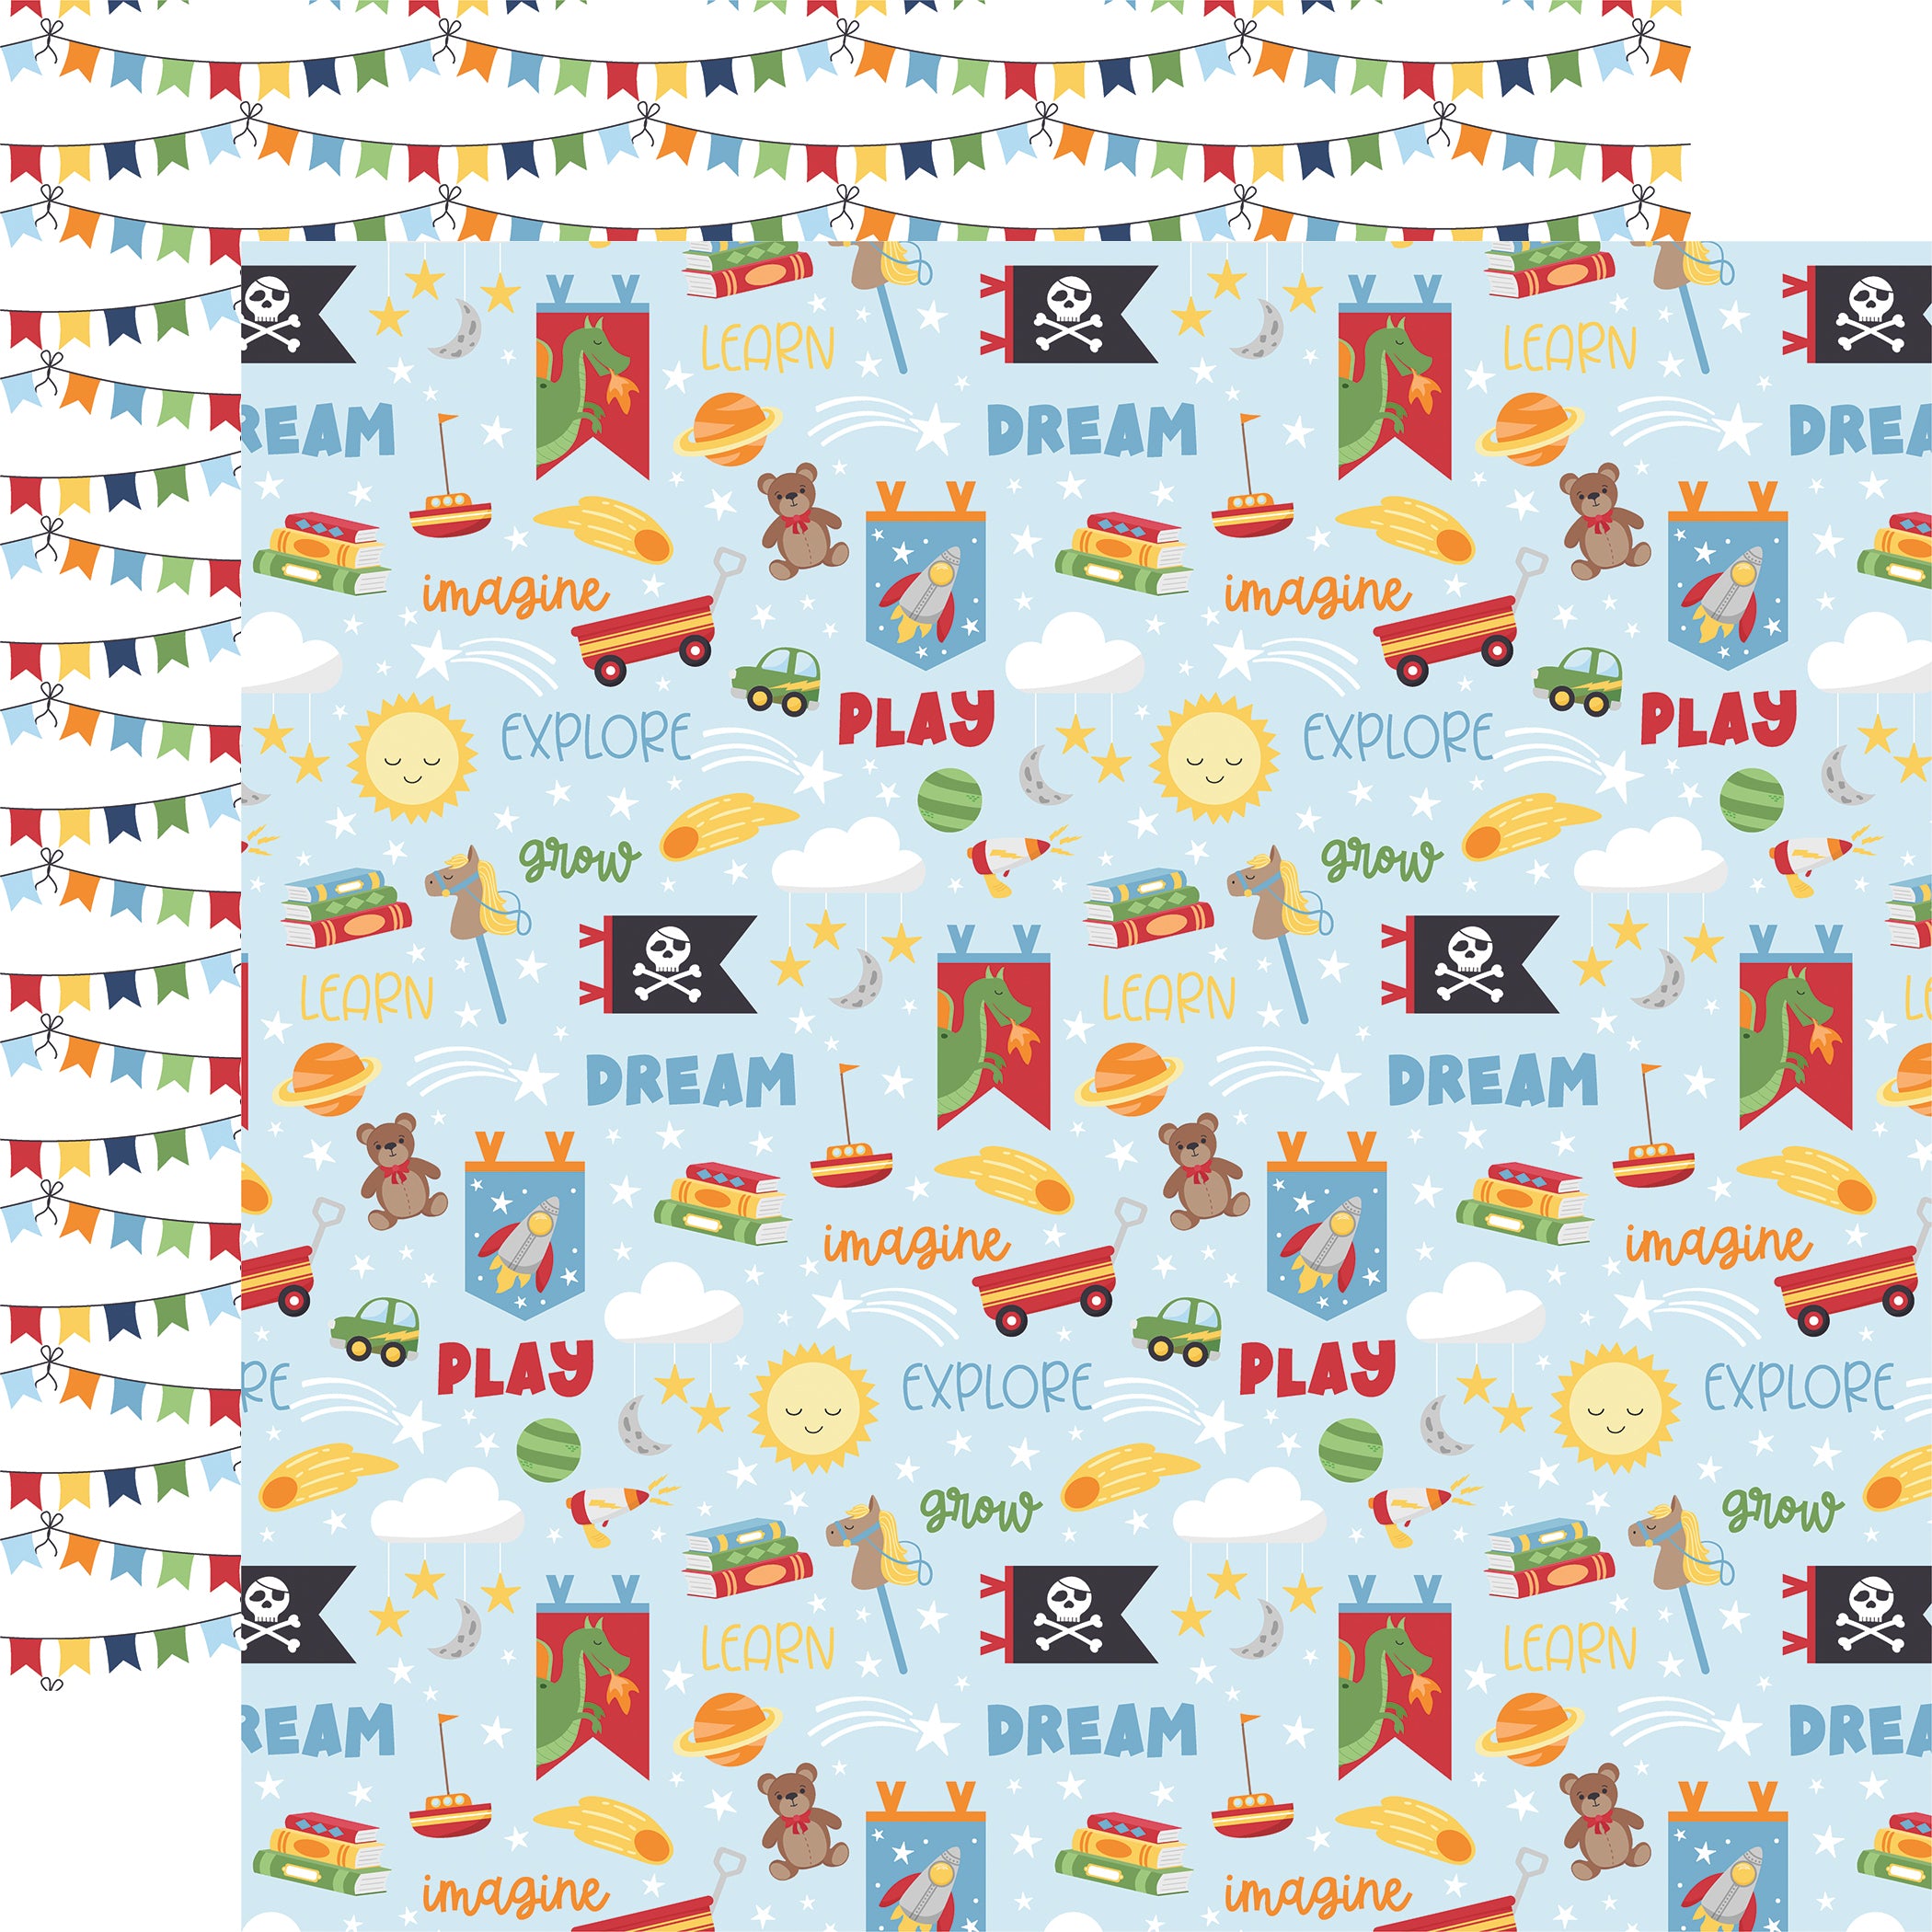 My Little Boy Collection 12 x 12 Scrapbook Collection Kit by Echo Park Paper